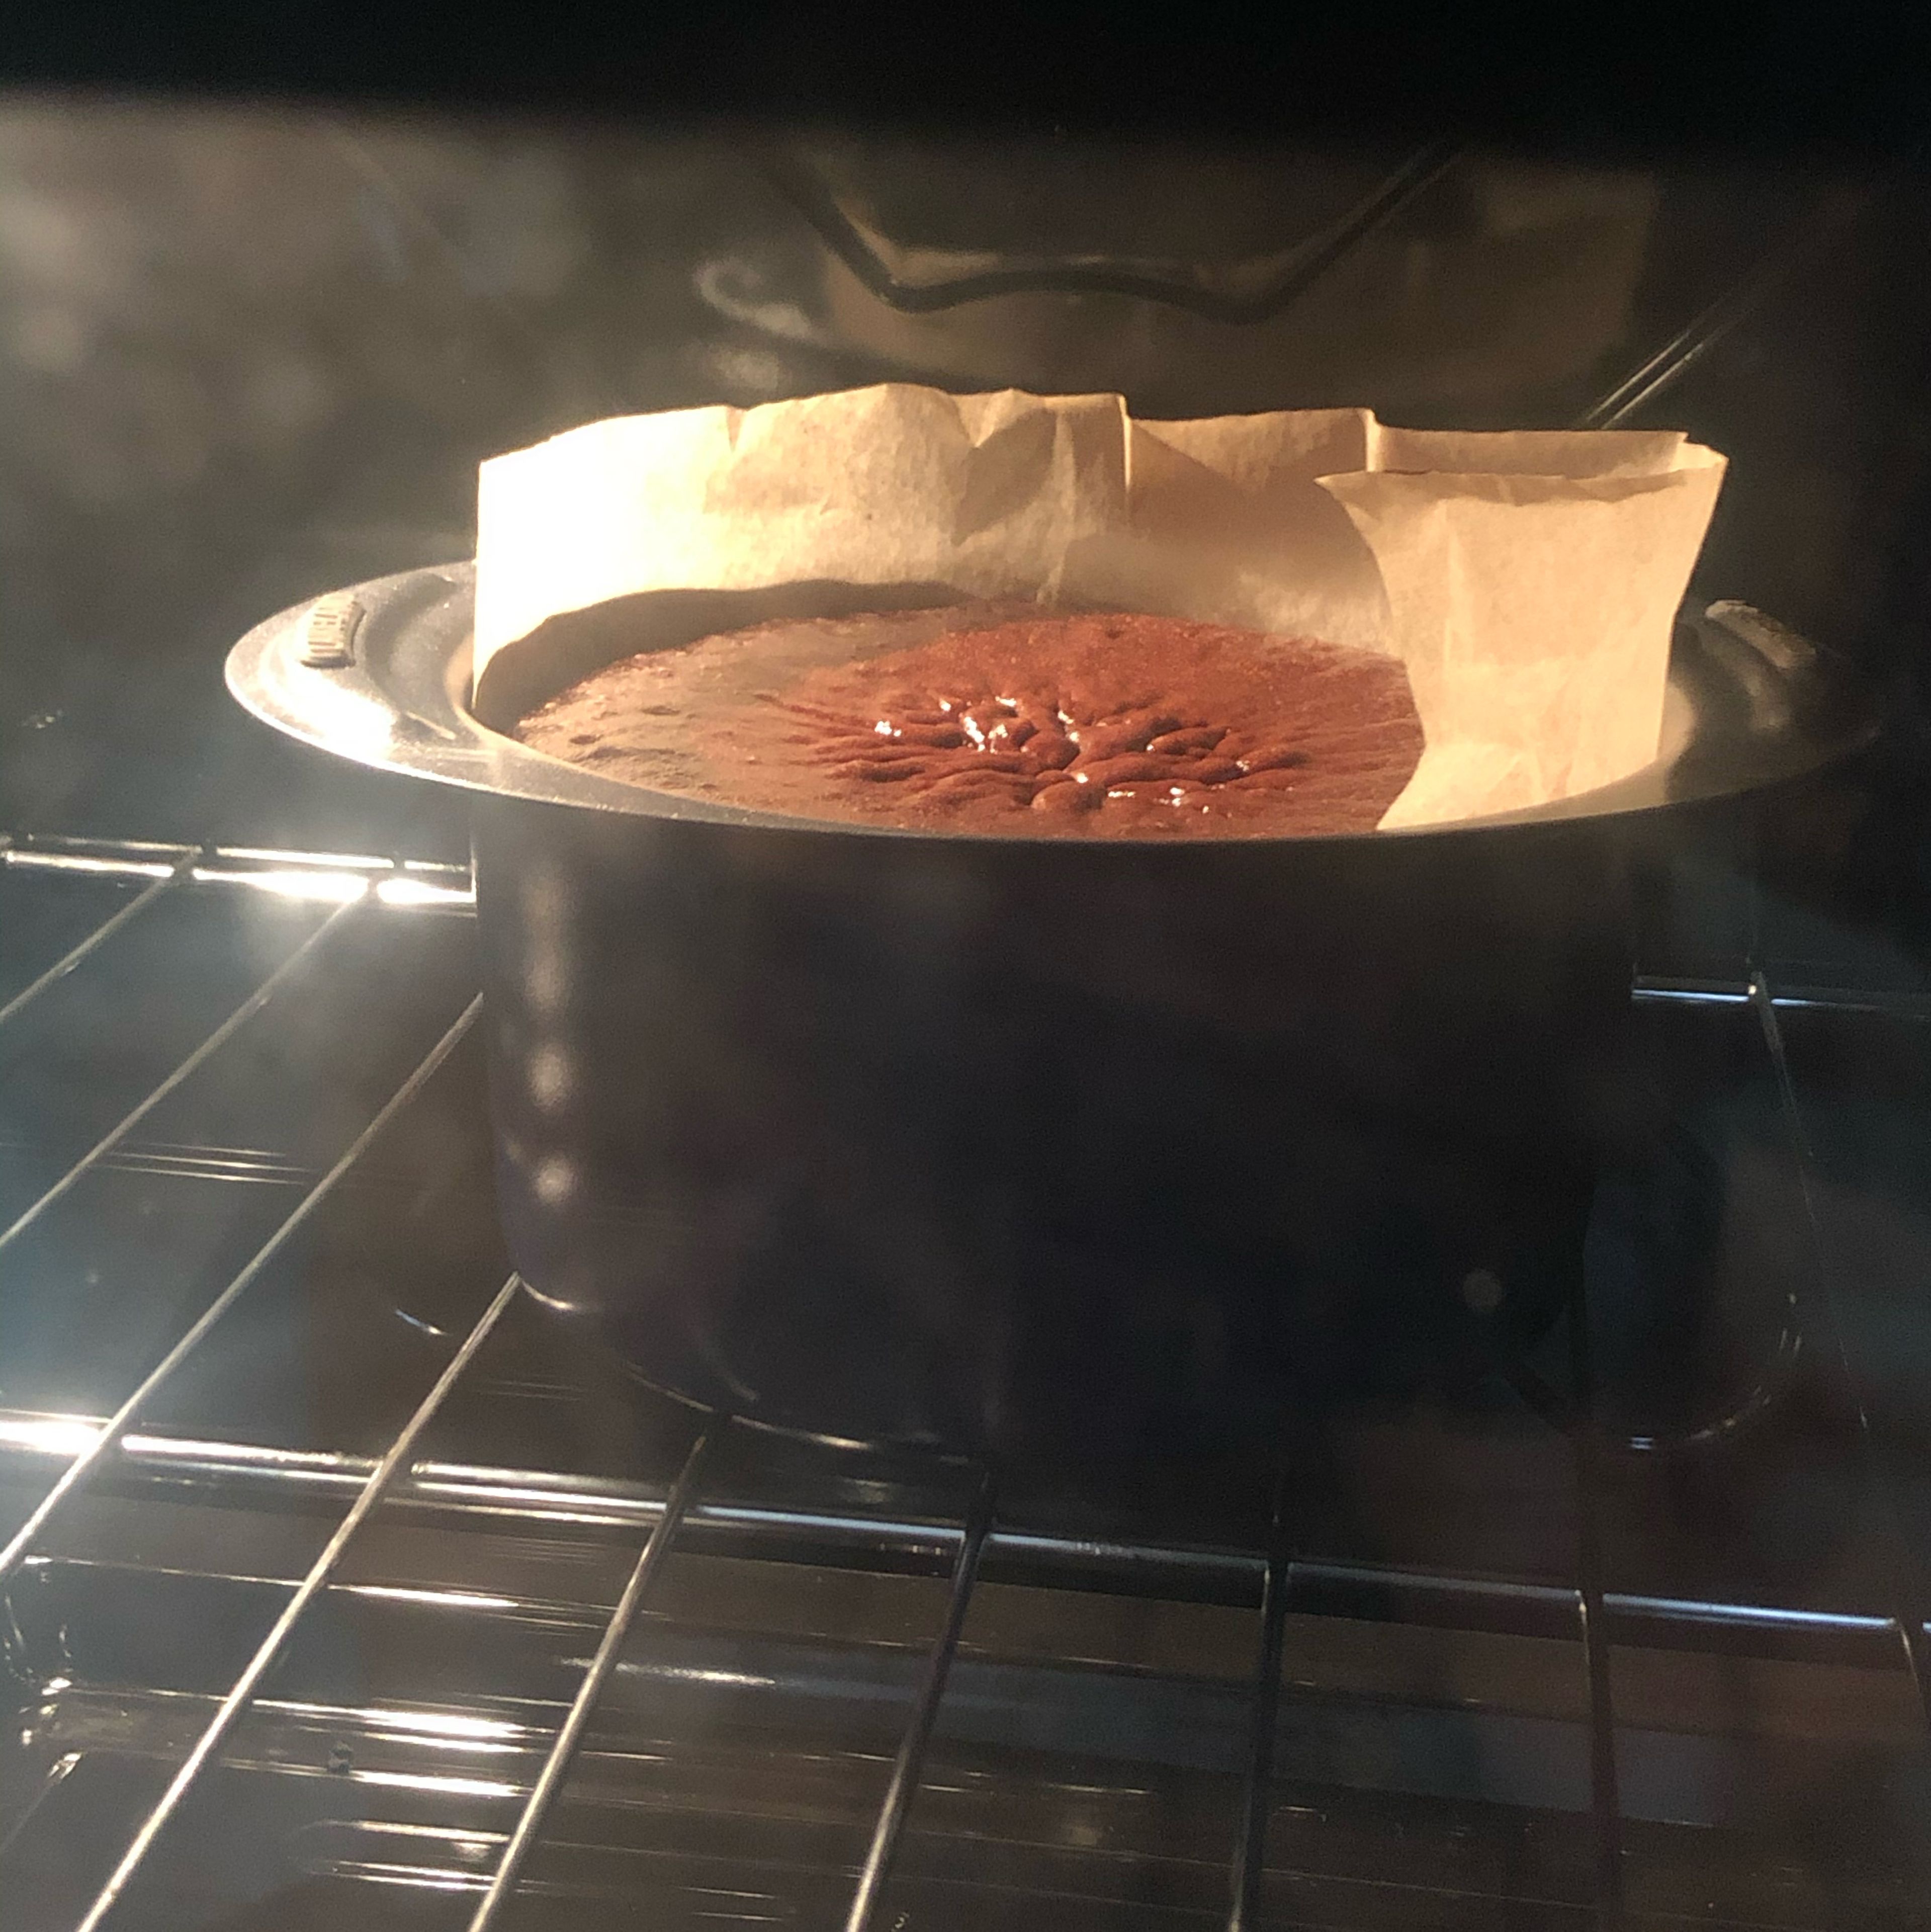 Place the cake in the oven and set the timer for 30 mins in 180 degree celcius